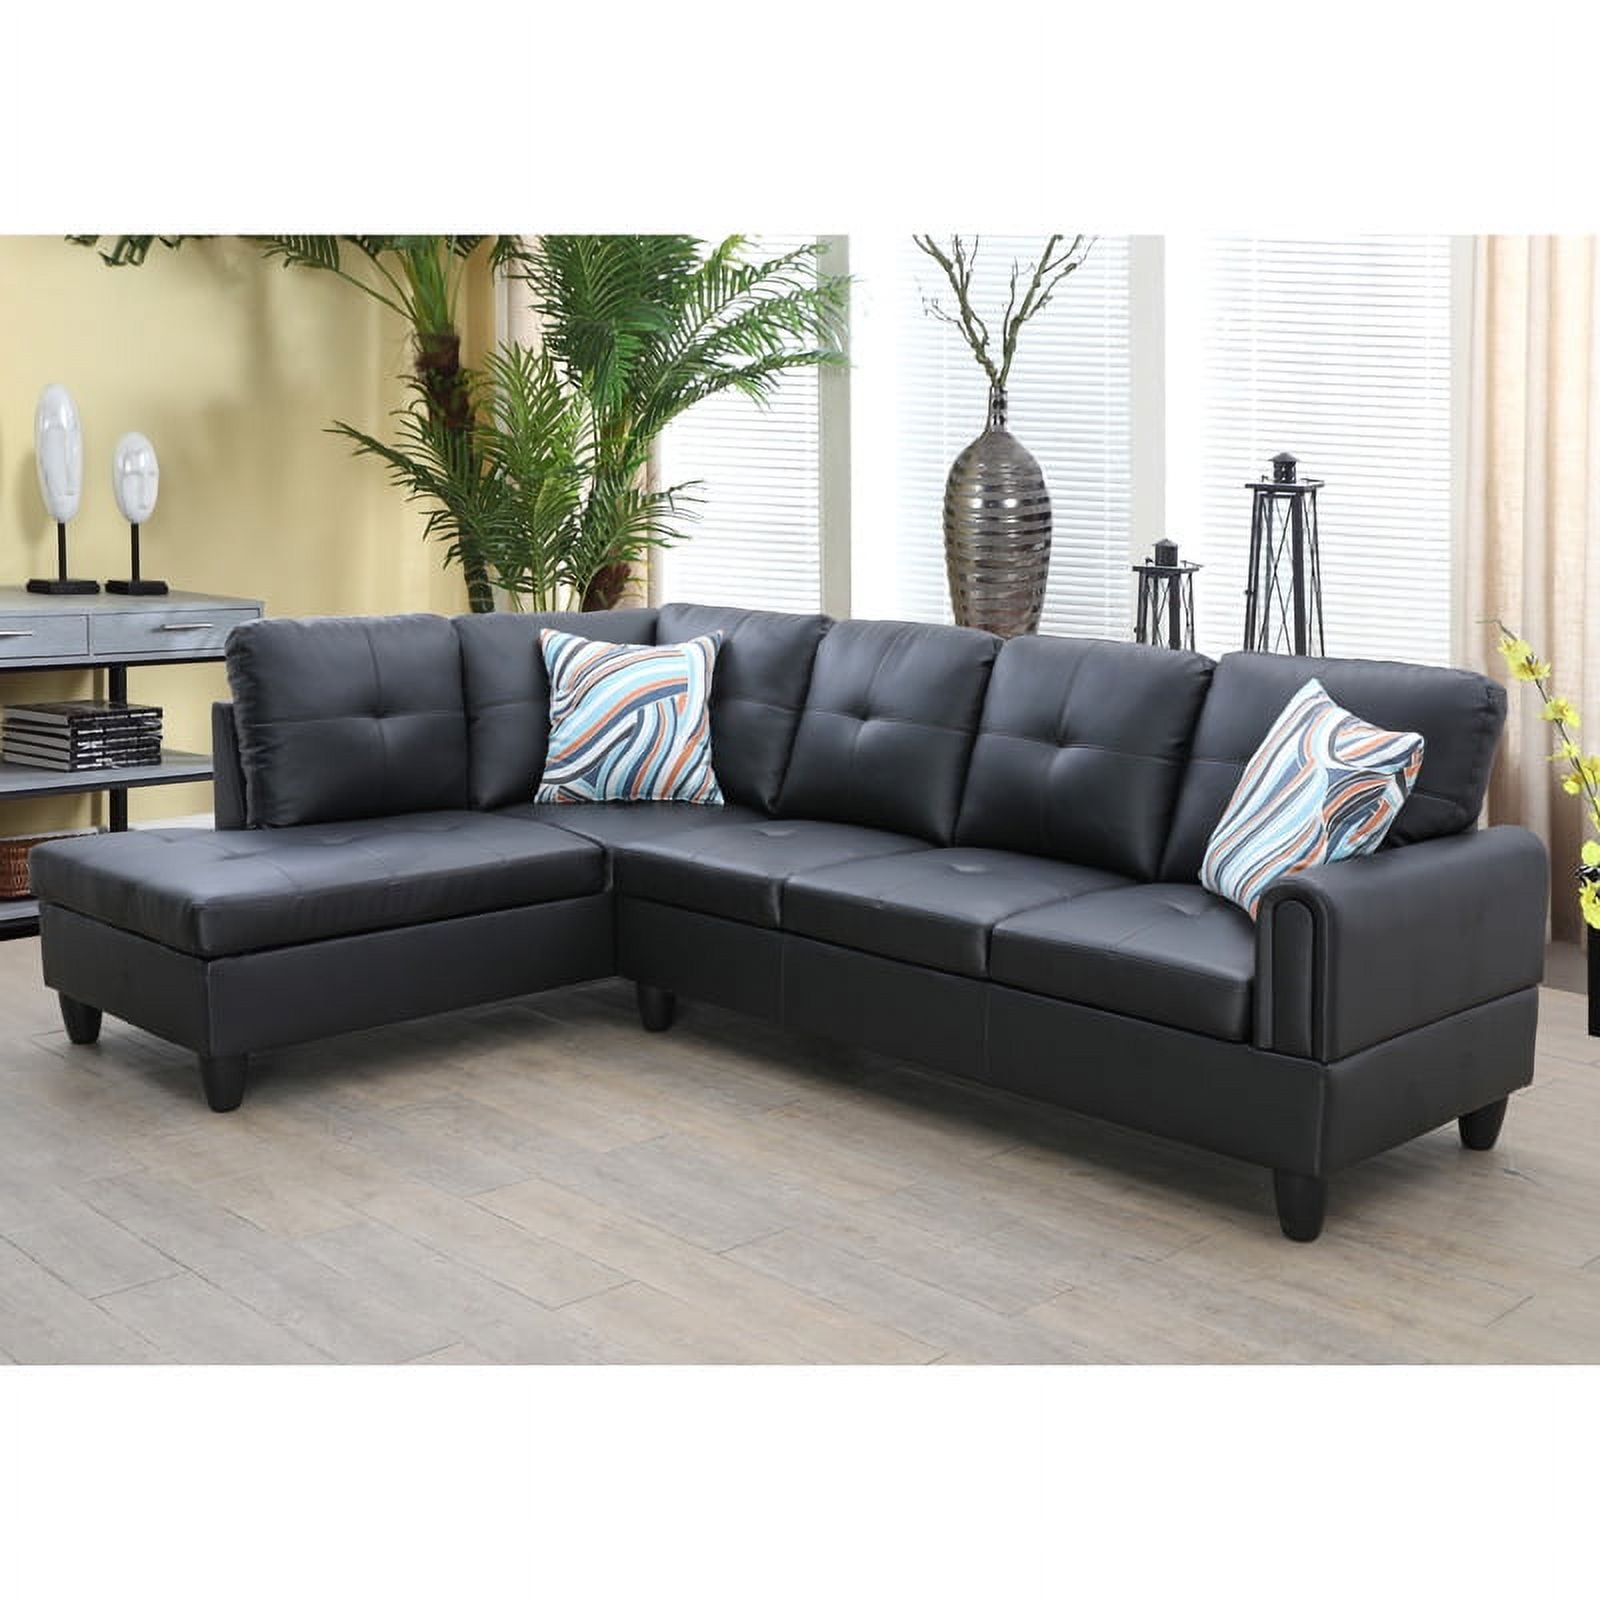 Hommoo Faux Leather 3 Piece Couch Living Room Sofa Set, L Shaped Couch For  Small Space, Black(without Ottoman) – Walmart With Regard To 3 Piece Leather Sectional Sofa Sets (View 14 of 15)